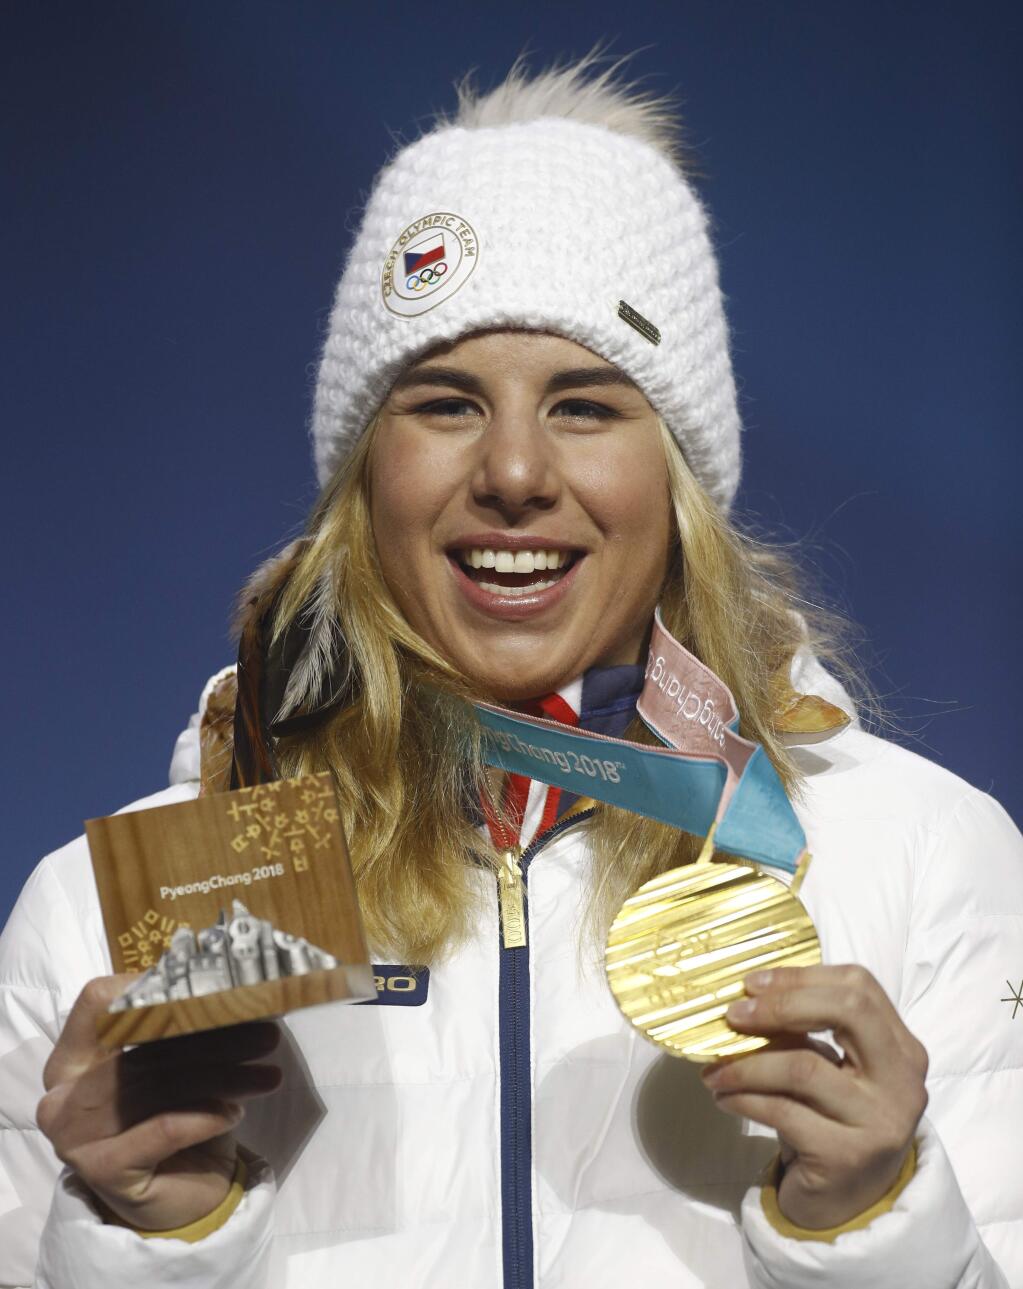 Gold medalist in the women's parallel giant slalom Ester Ledecka, of the Czech Republic, poses during the medals ceremony at the 2018 Winter Olympics in Pyeongchang, South Korea, Saturday, Feb. 24, 2018. (AP Photo/Patrick Semansky)